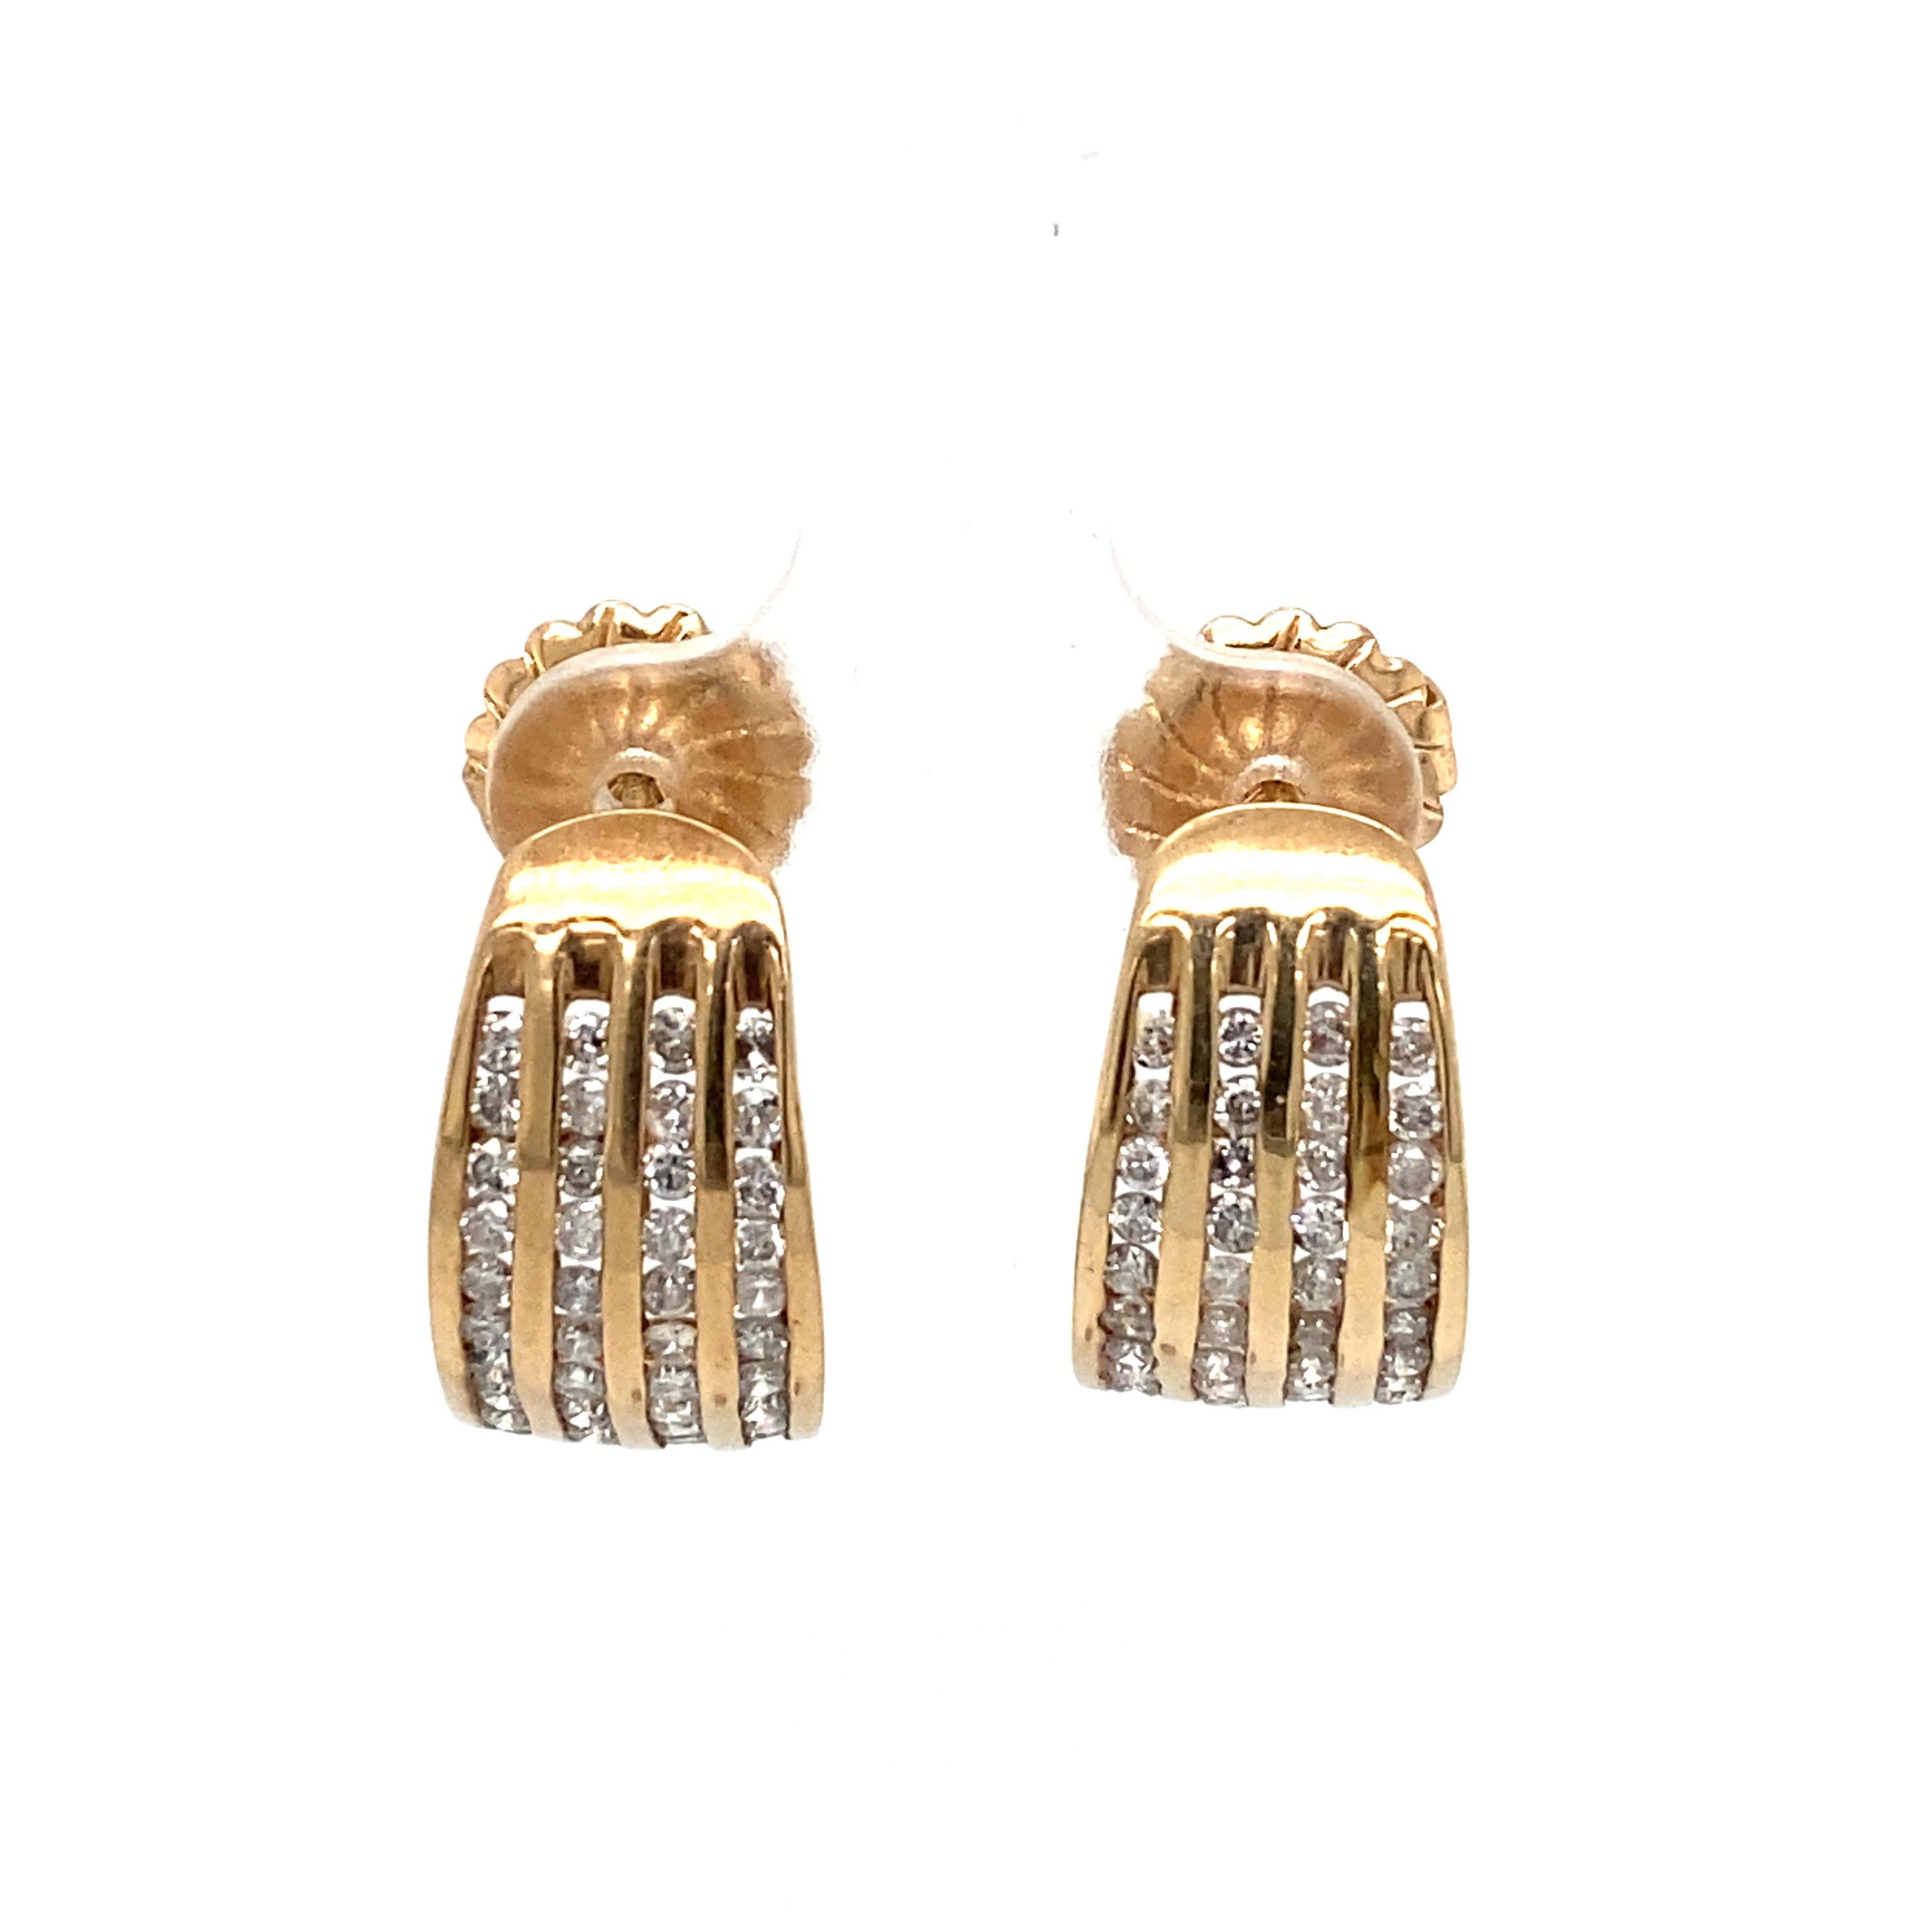 Item Details: These unique retro earrings have four rows of channel set diamonds in a gold setting.

Circa: 1960s
Metal Type: 10k gold
Weight: 5.5g
Size: 0.75